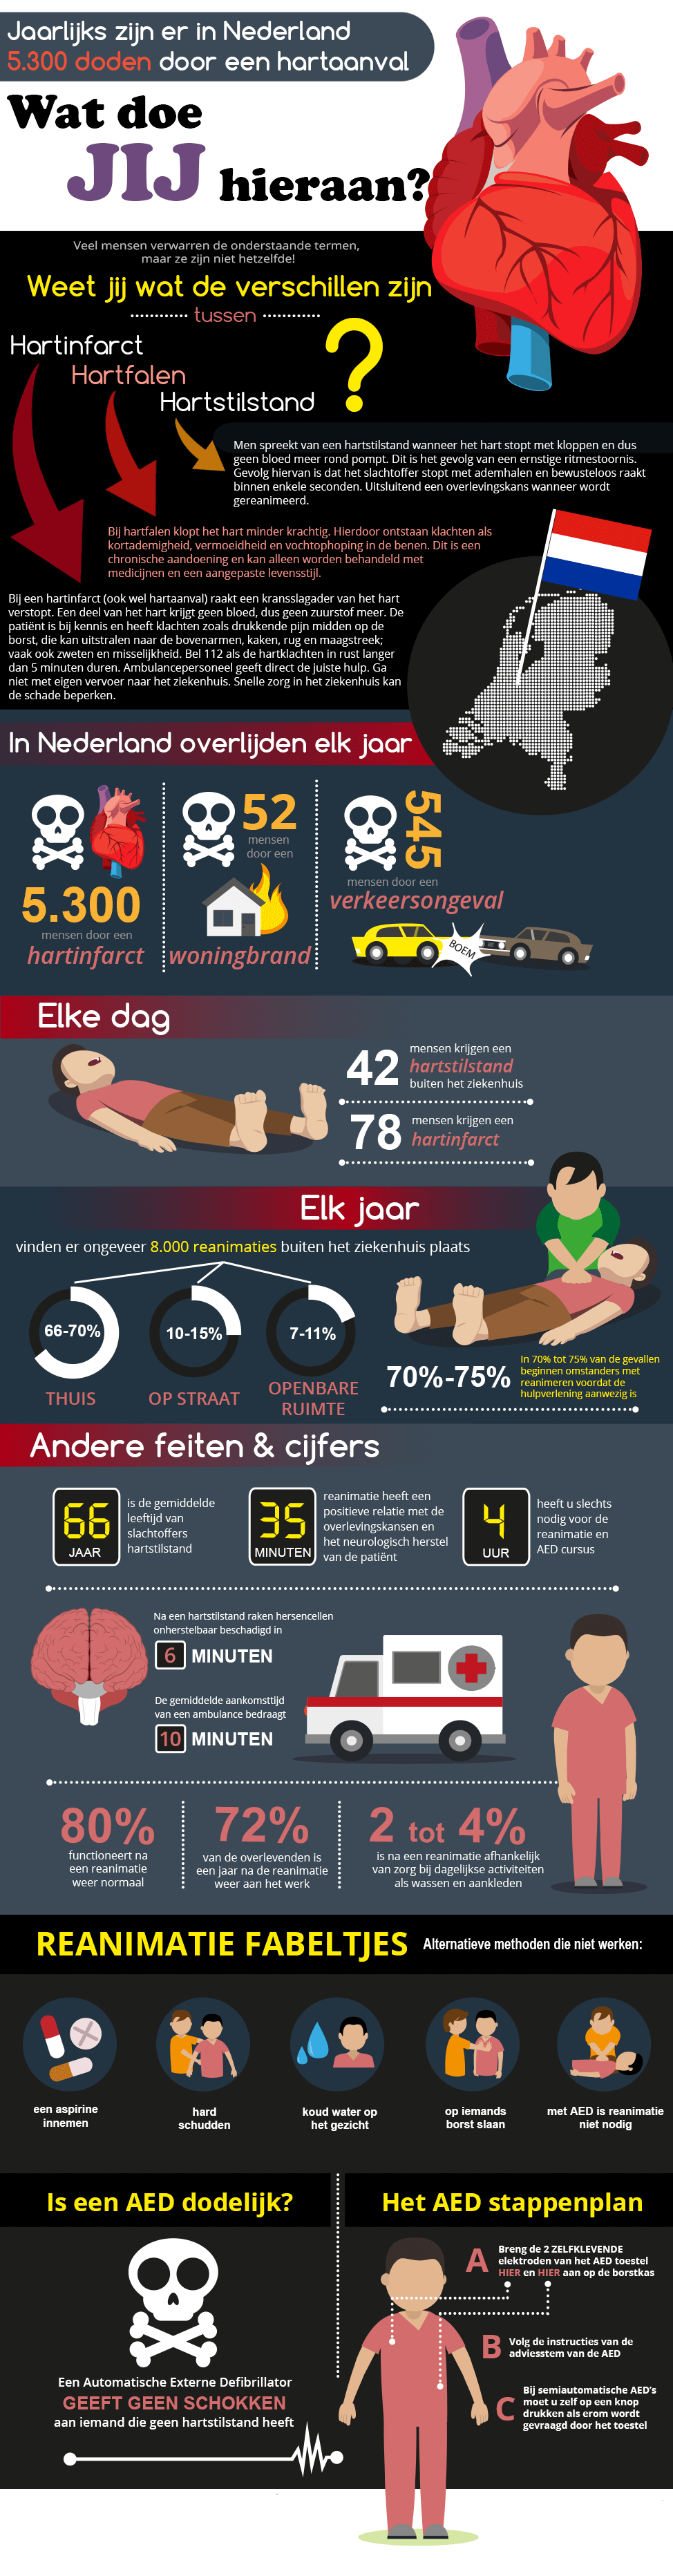 AED infographic